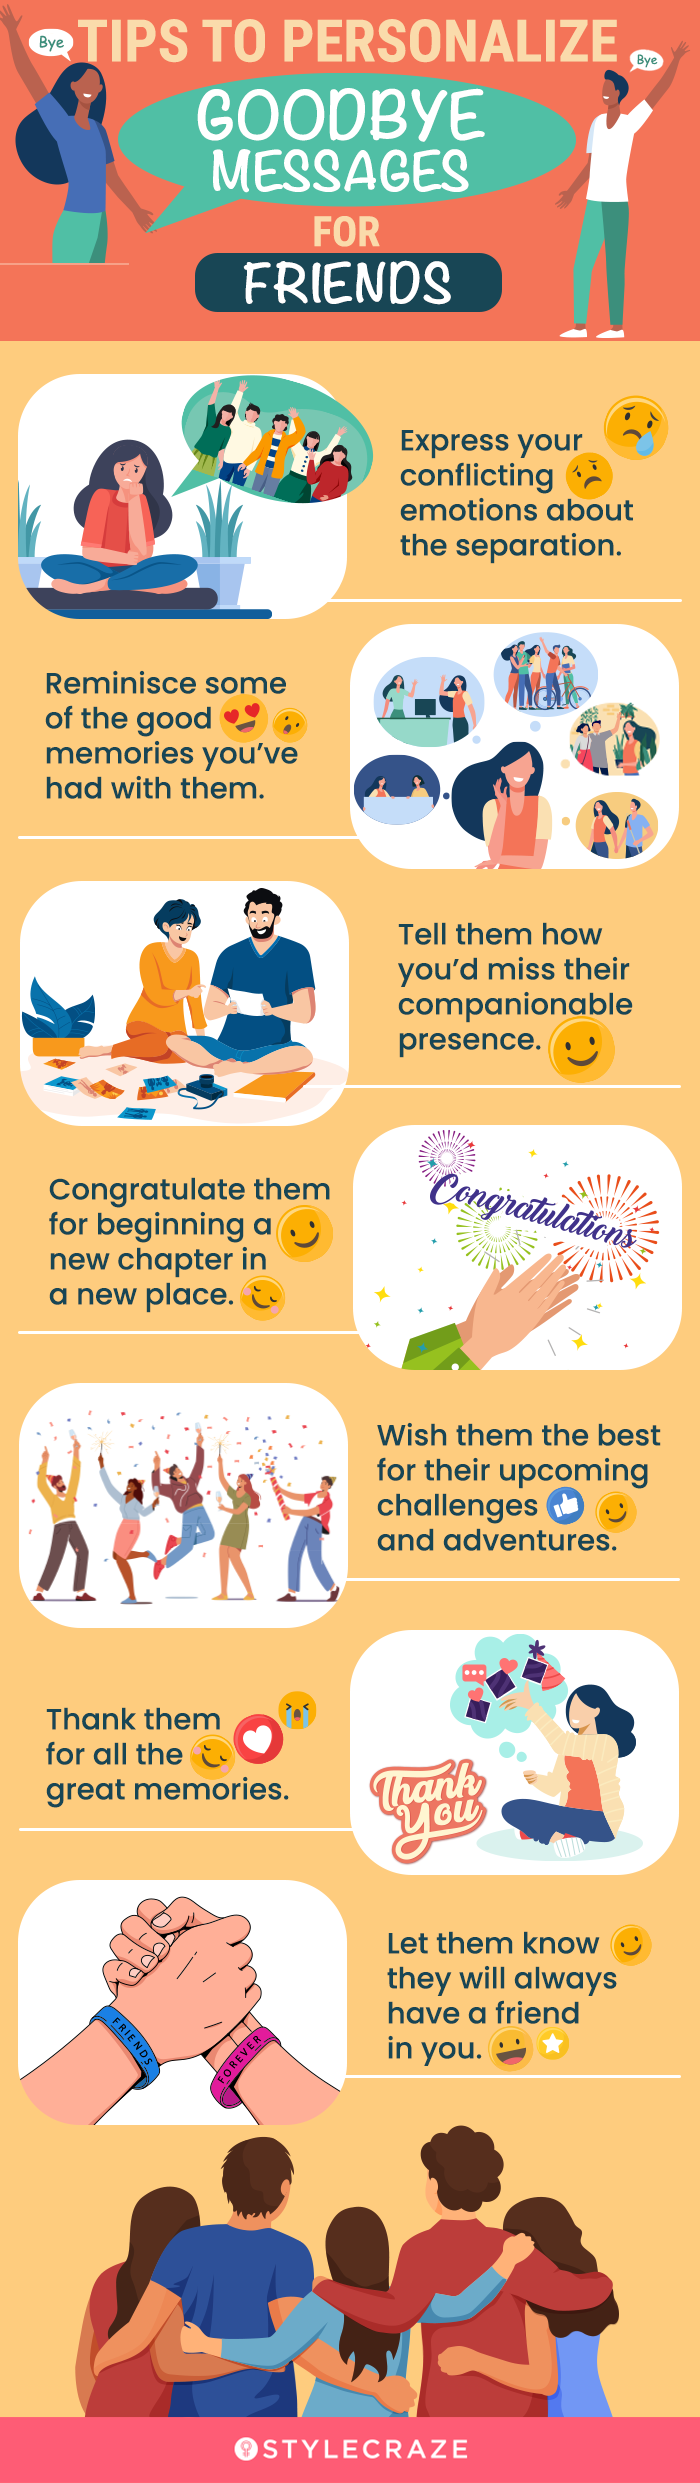 tips to personalize goodbye messages for friends [infographic]